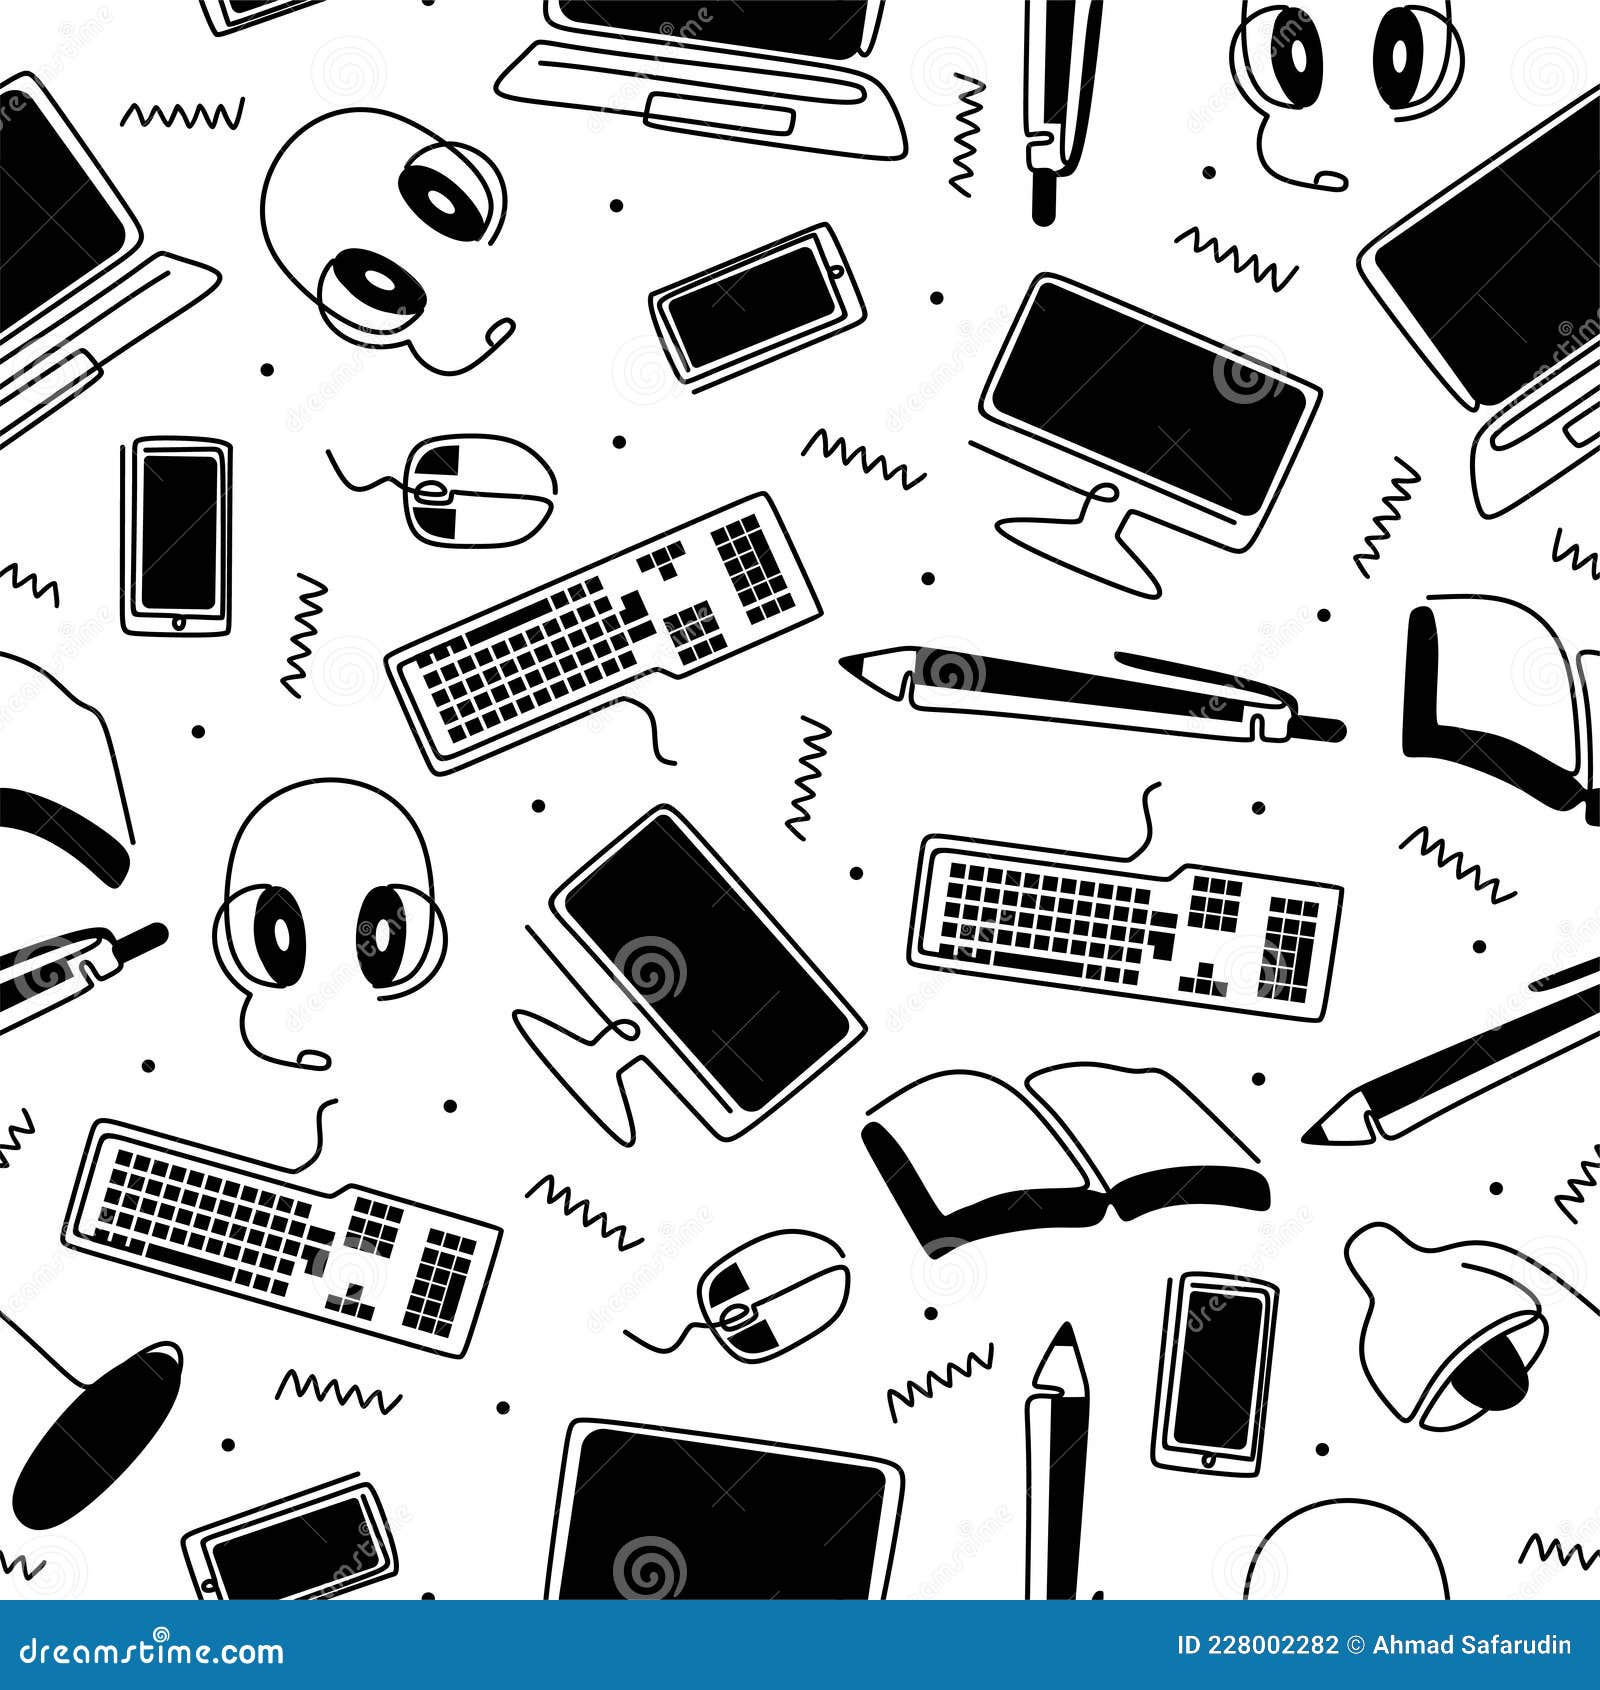 Keyboards in Pencil Sketch Vector Images over 330